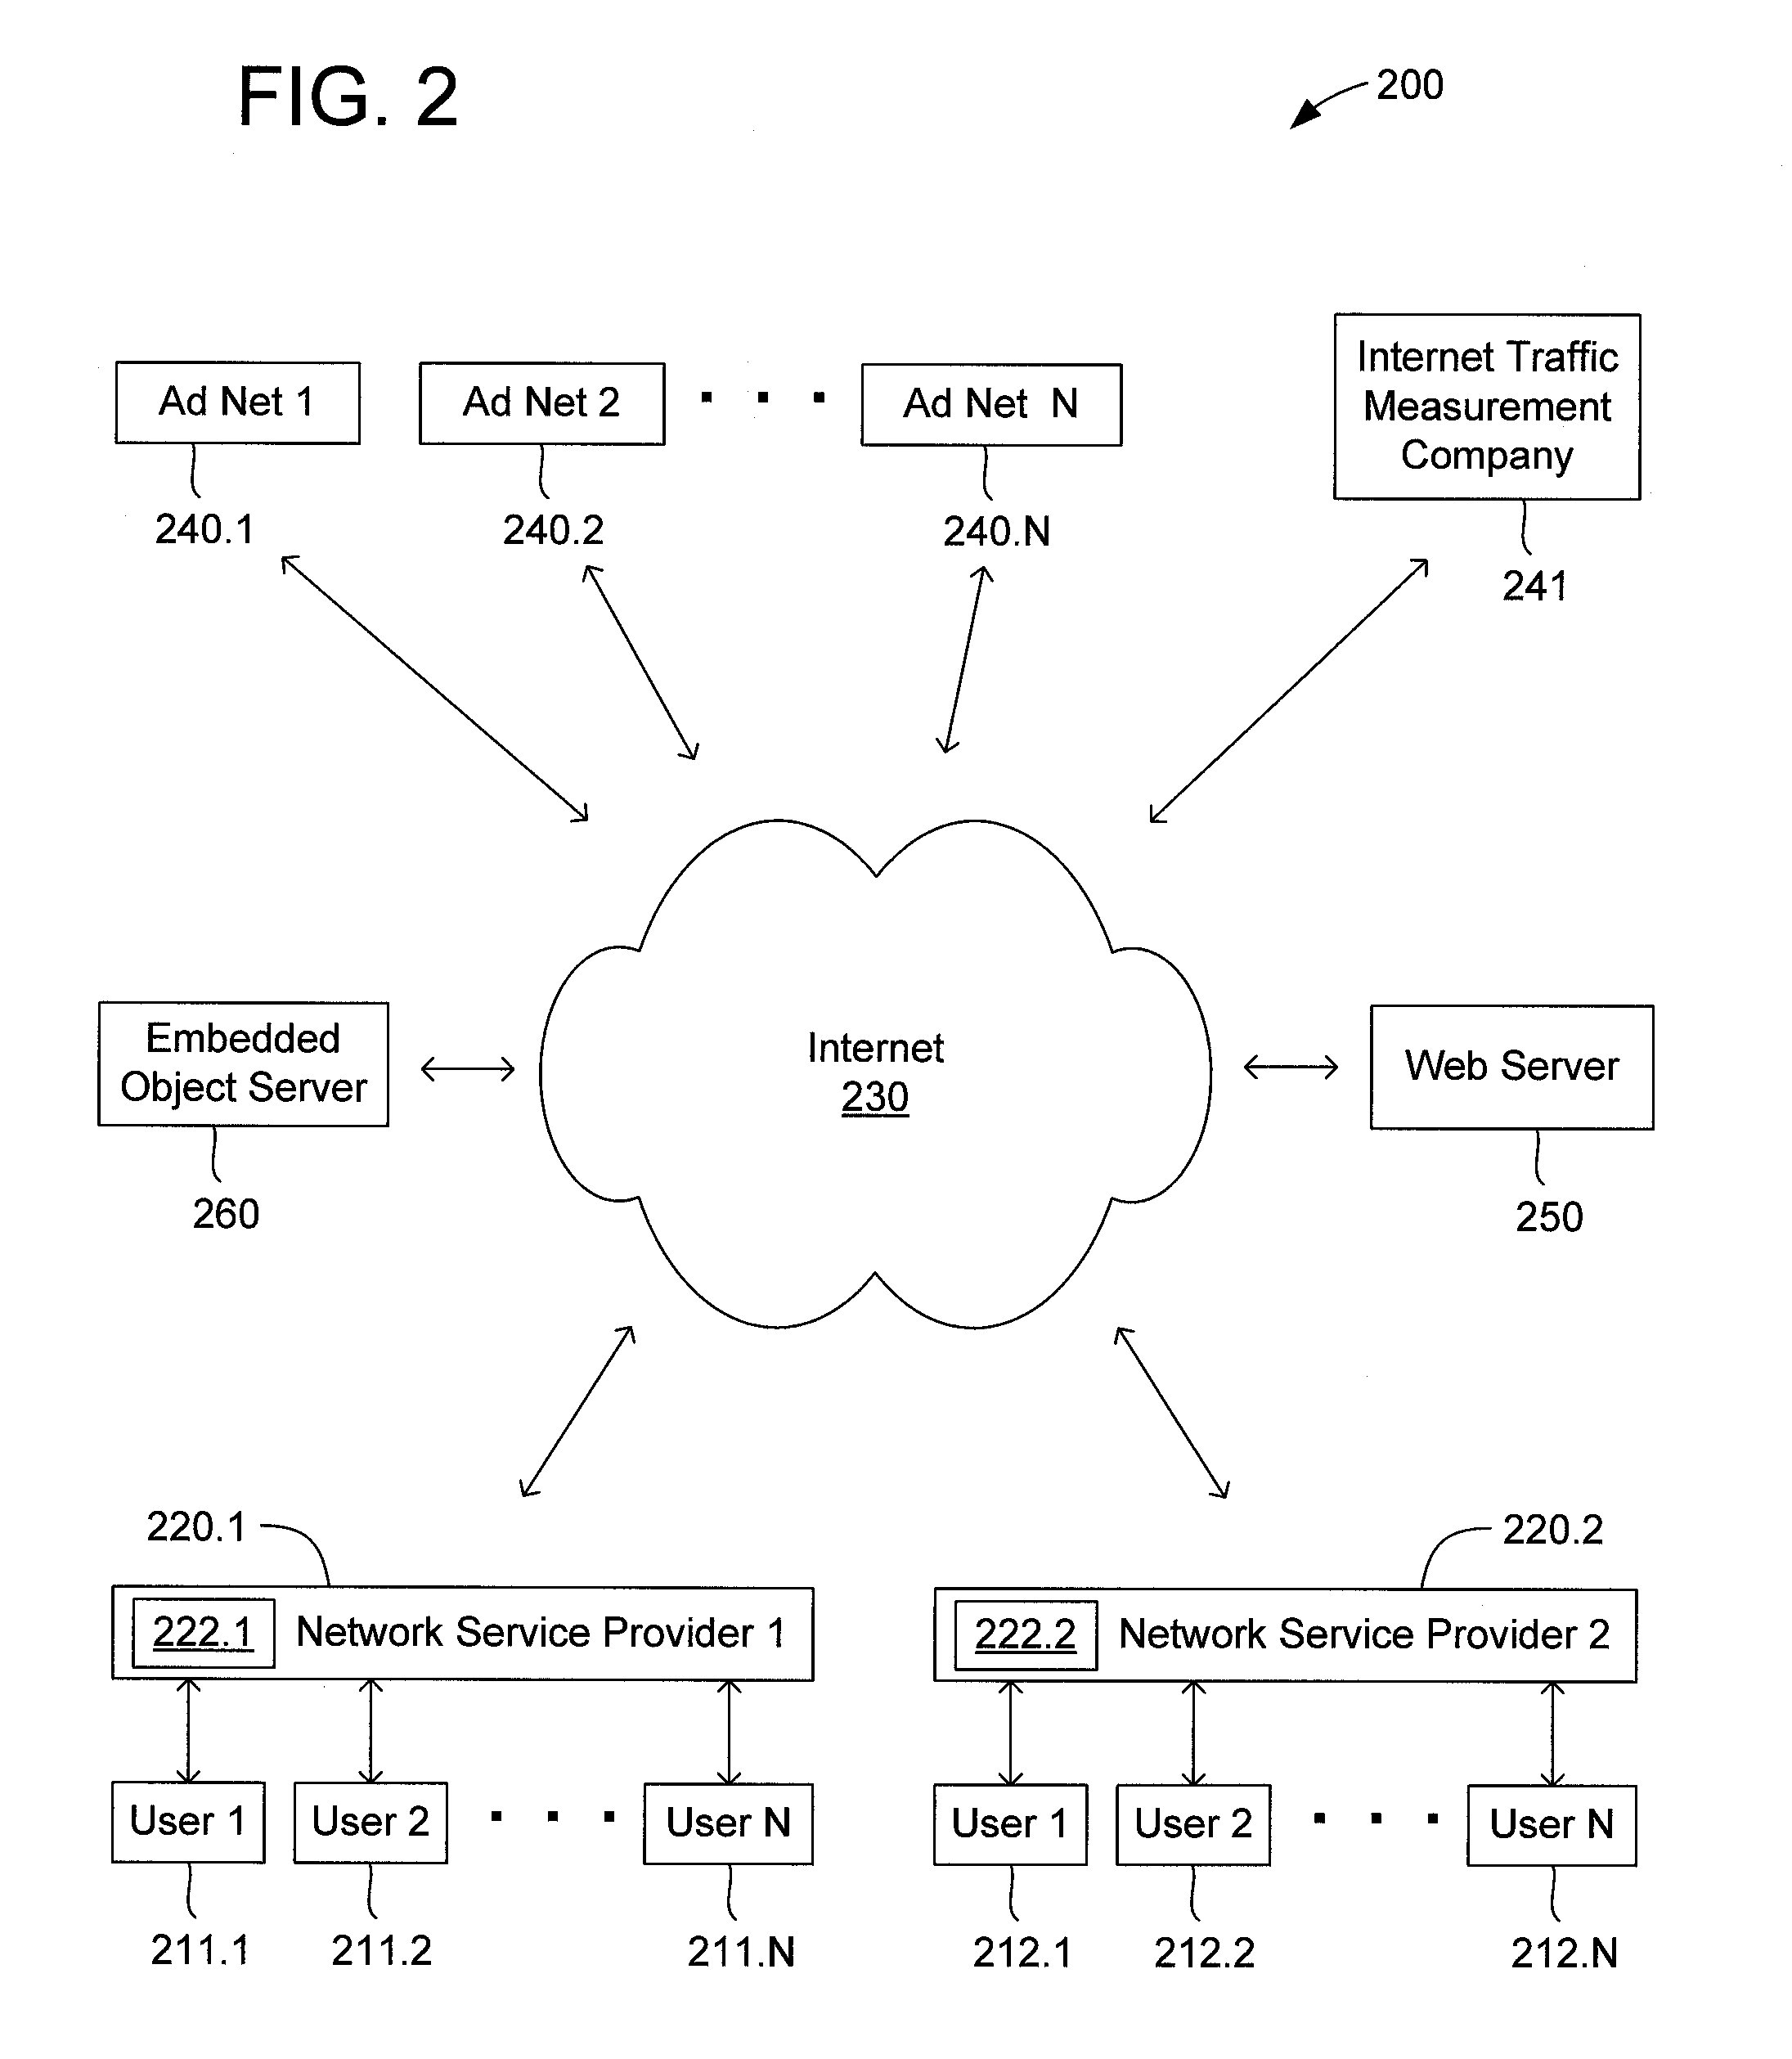 Method and apparatus for internet traffic monitoring by third parties using monitoring implements transmitted via piggybacking HTTP transactions